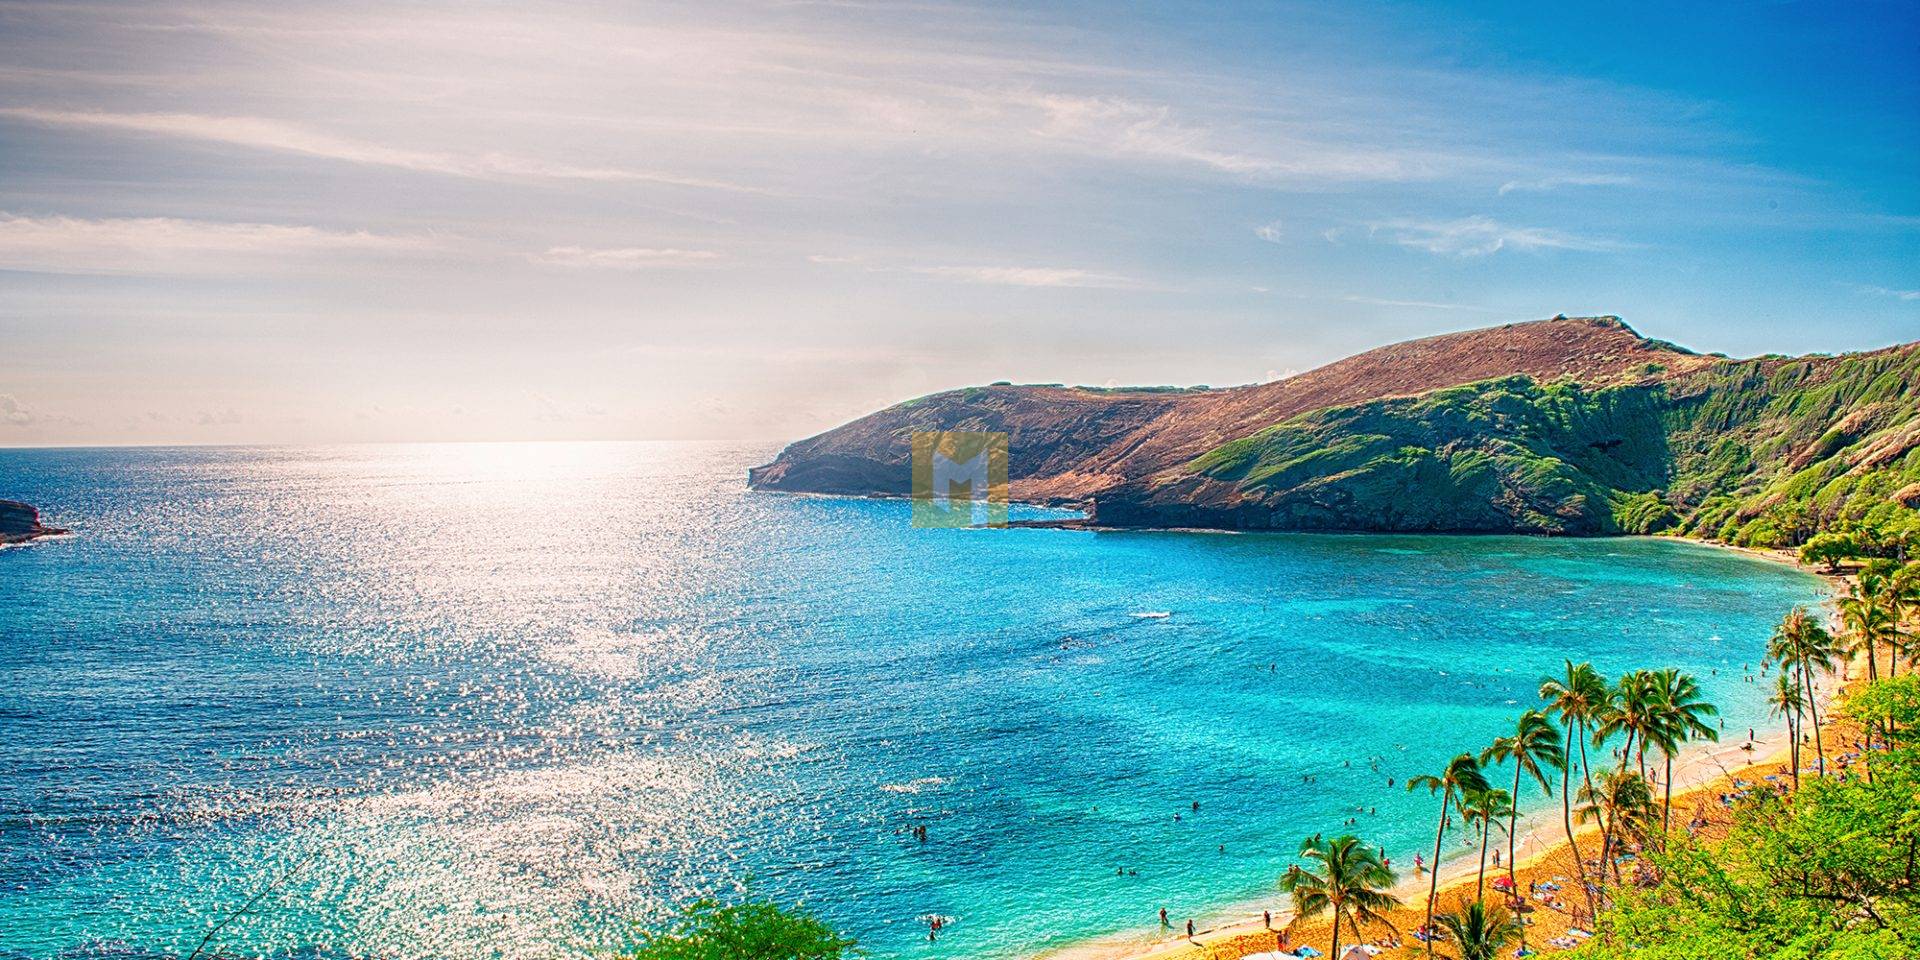 WHEN IS THE BEST TIME TO VISIT HAWAII?